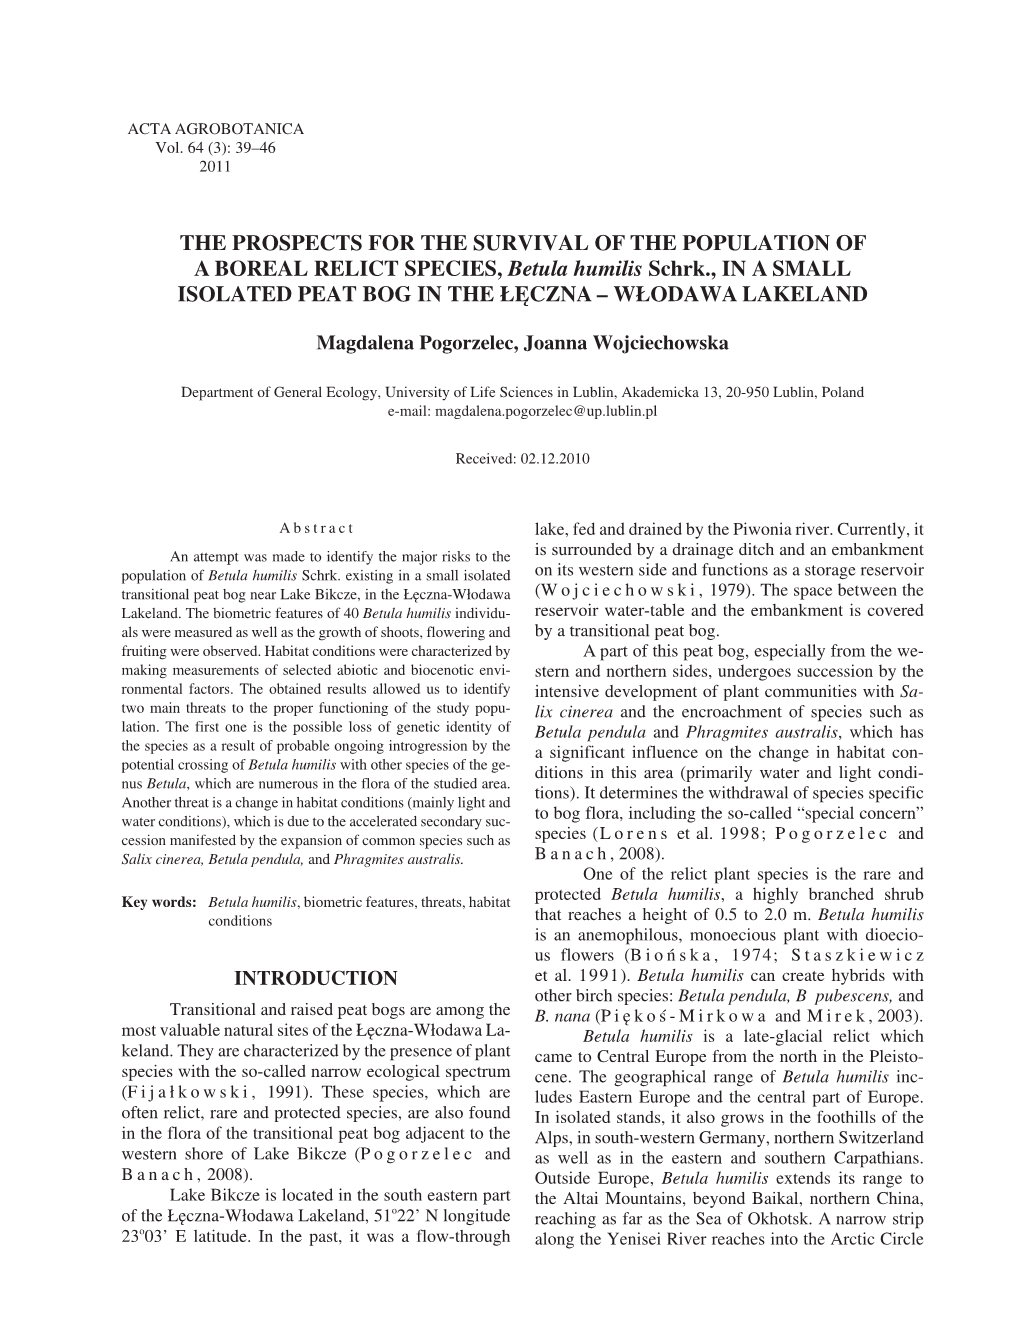 THE PROSPECTS for the SURVIVAL of the POPULATION of a BOREAL RELICT SPECIES, Betula Humilis Schrk., in a SMALL ISOLATED PEAT BOG in the ŁĘCZNA – WŁODAWA LAKELAND